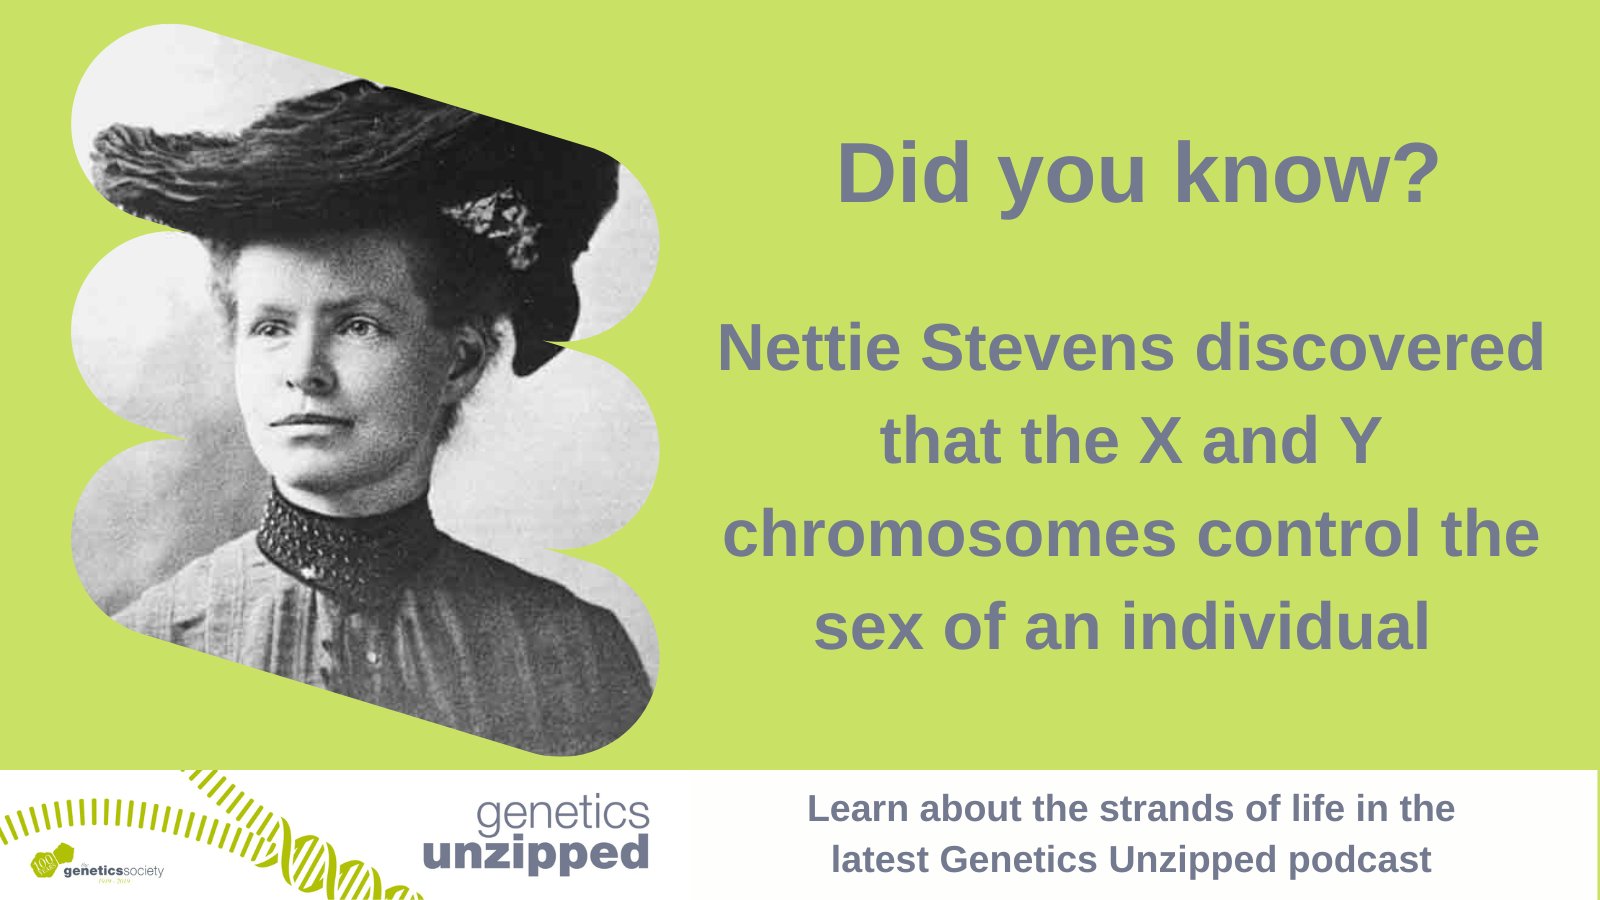 GeneticsUnzipped on X: "Do you know who Nettie Stevens is? She was the first to figure out that in many species, it's the X and Y chromosomes that determine whether an individual